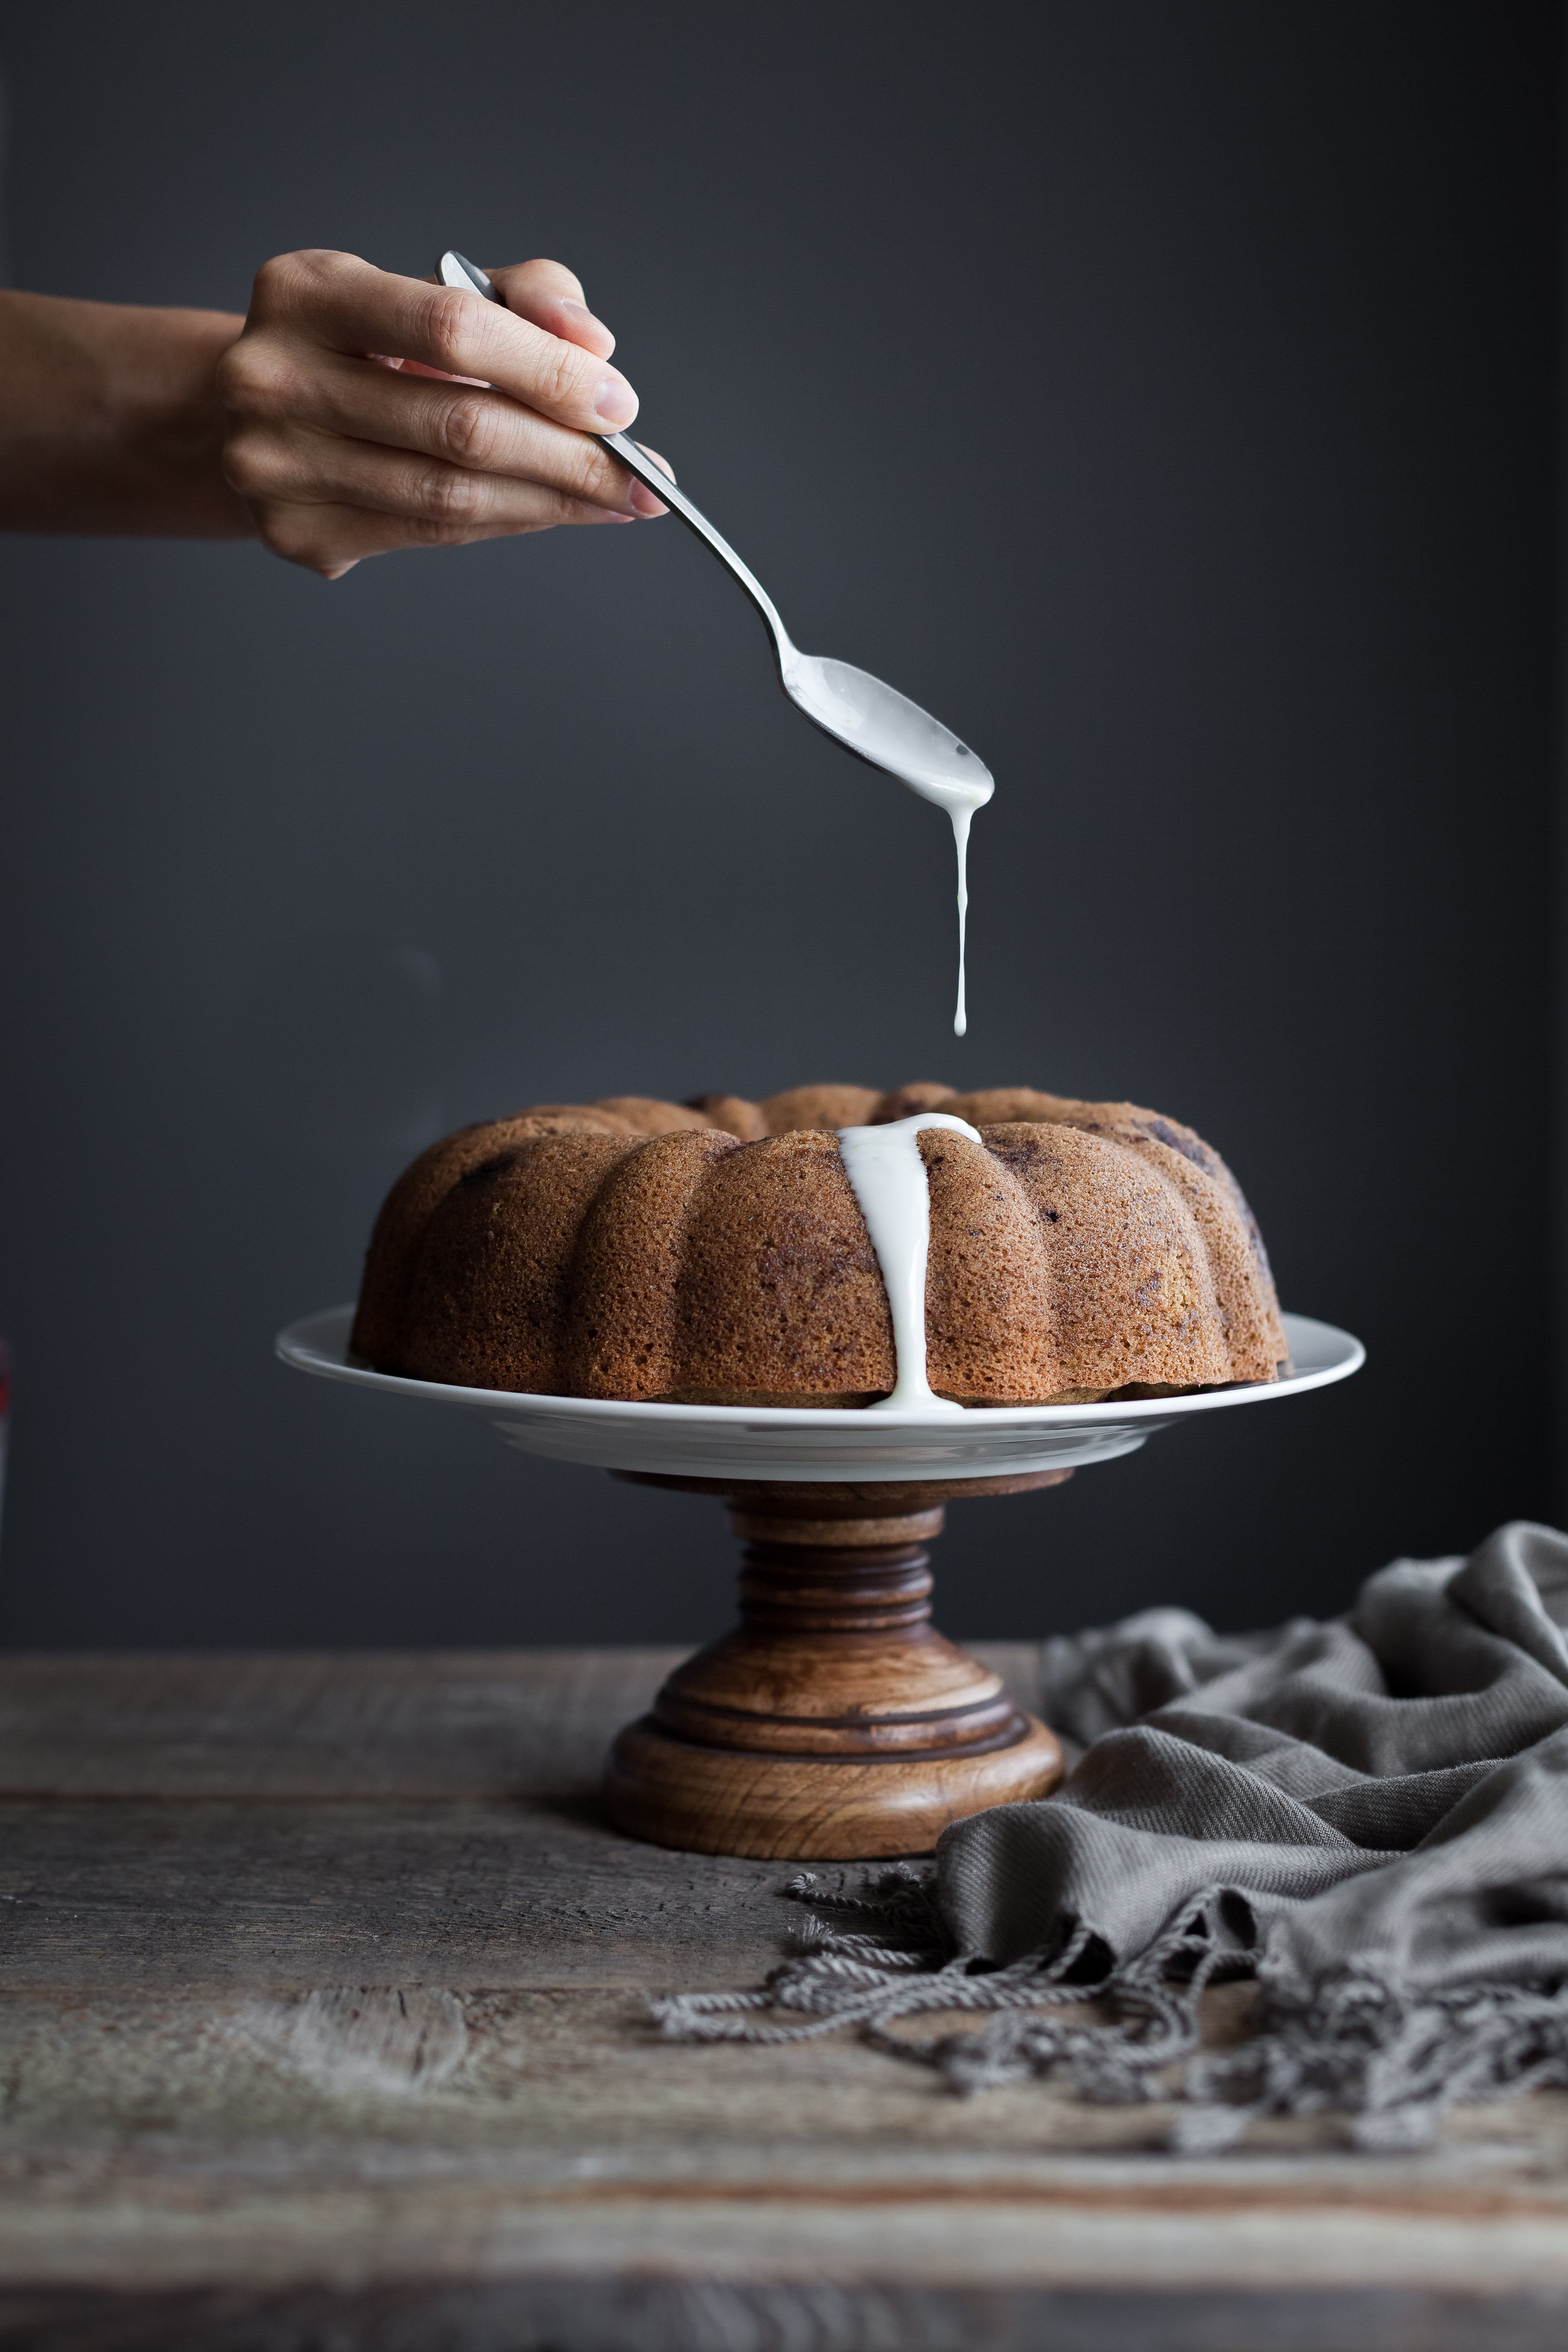 a hand holding a spoon drizzling glaze on bundt cake on a cake stand.